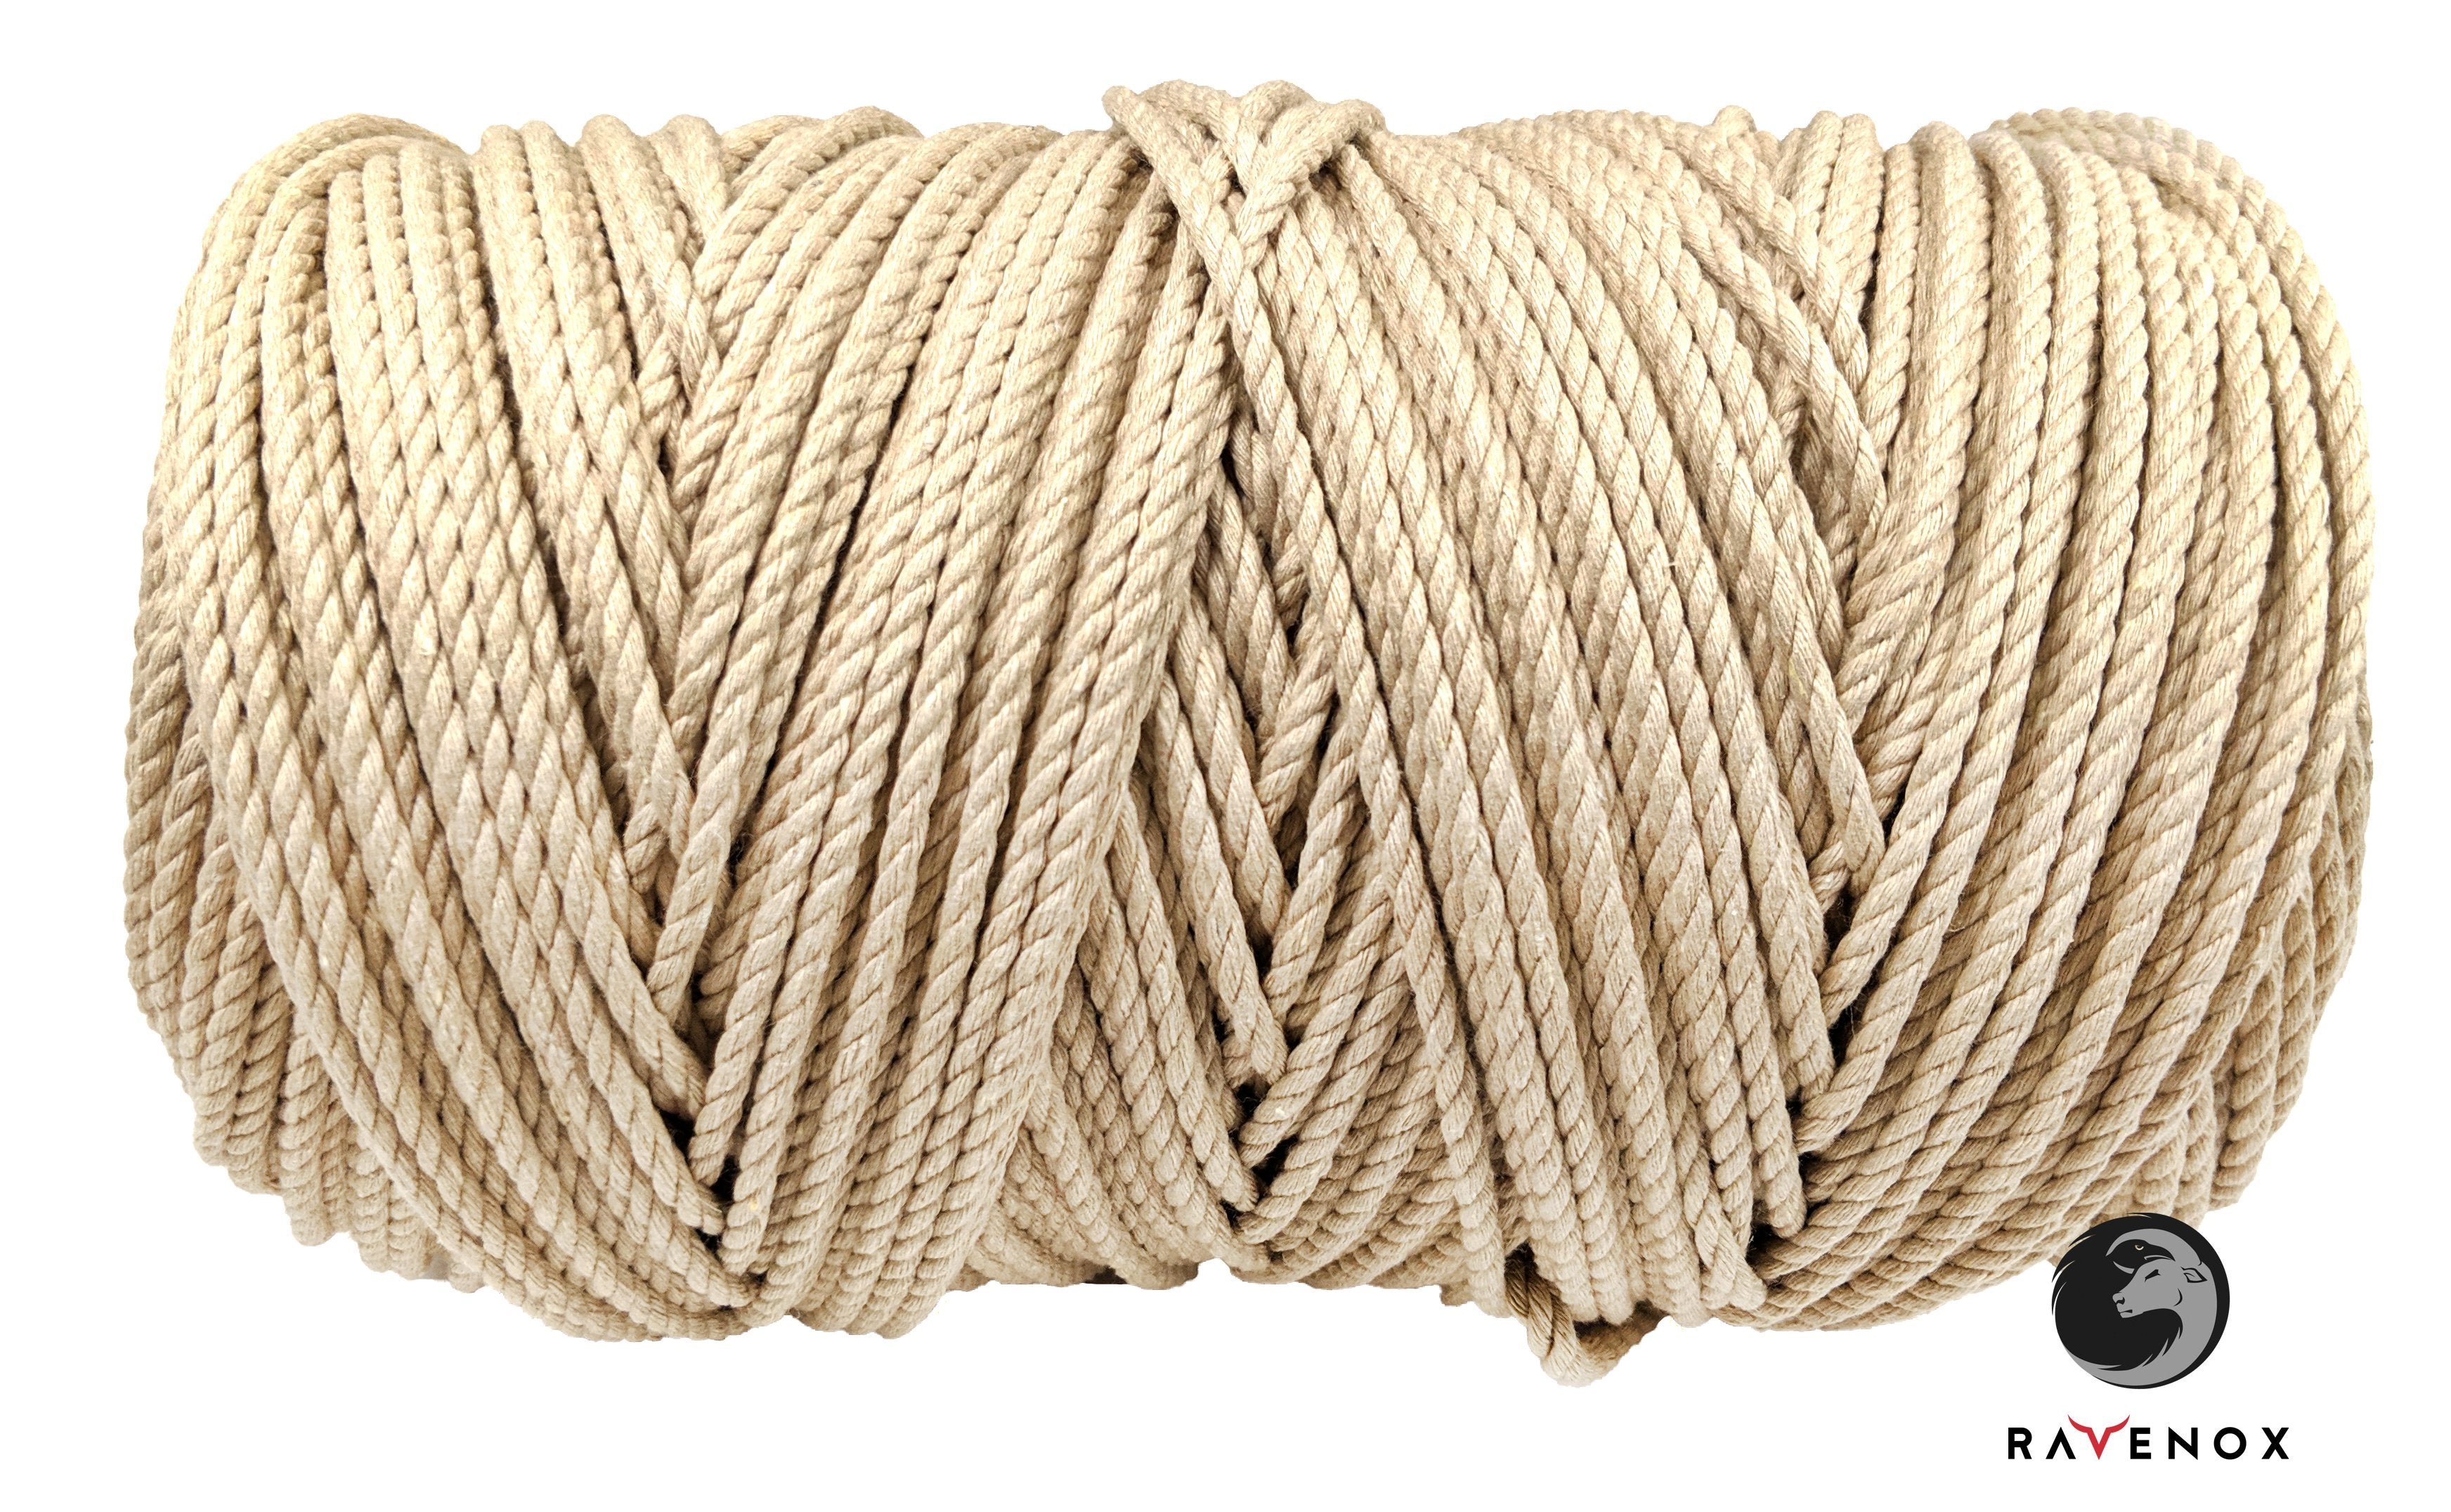 Time 4 Crafts 6mm Craft Cotton Rope Set 